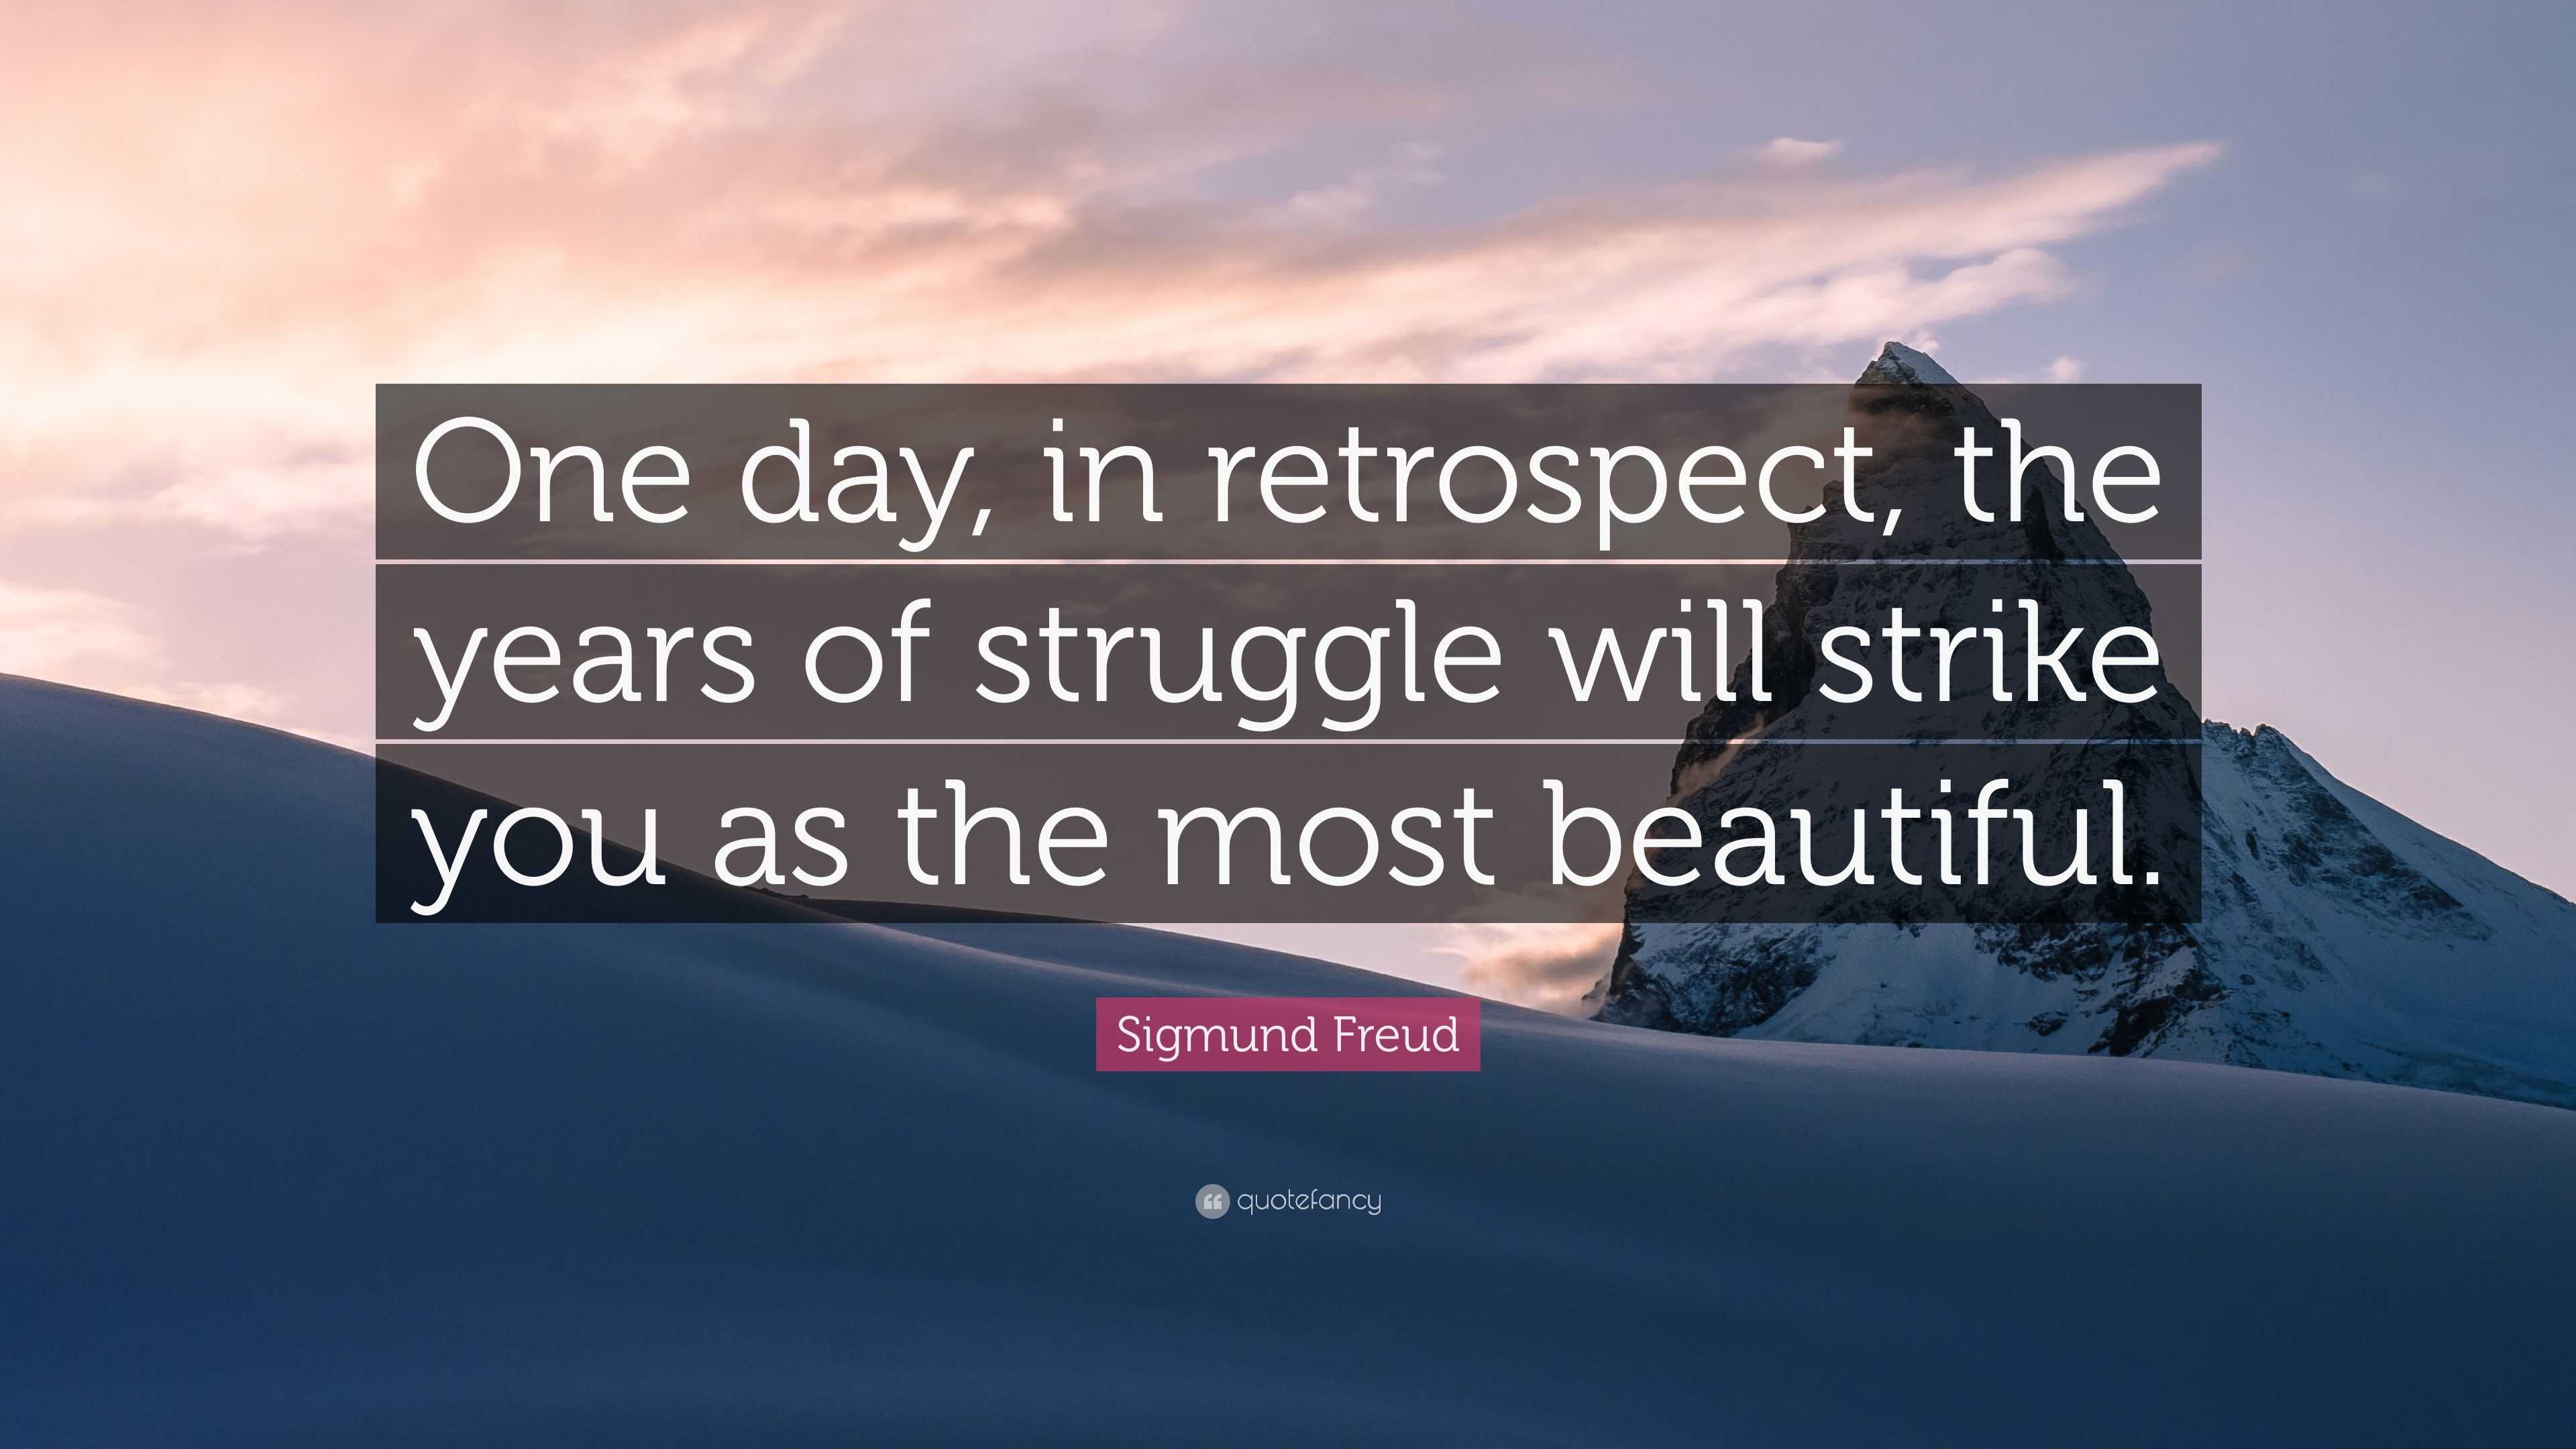 Sigmund Freud Quote “one Day In Retrospect The Years Of Struggle Will Strike You As The Most